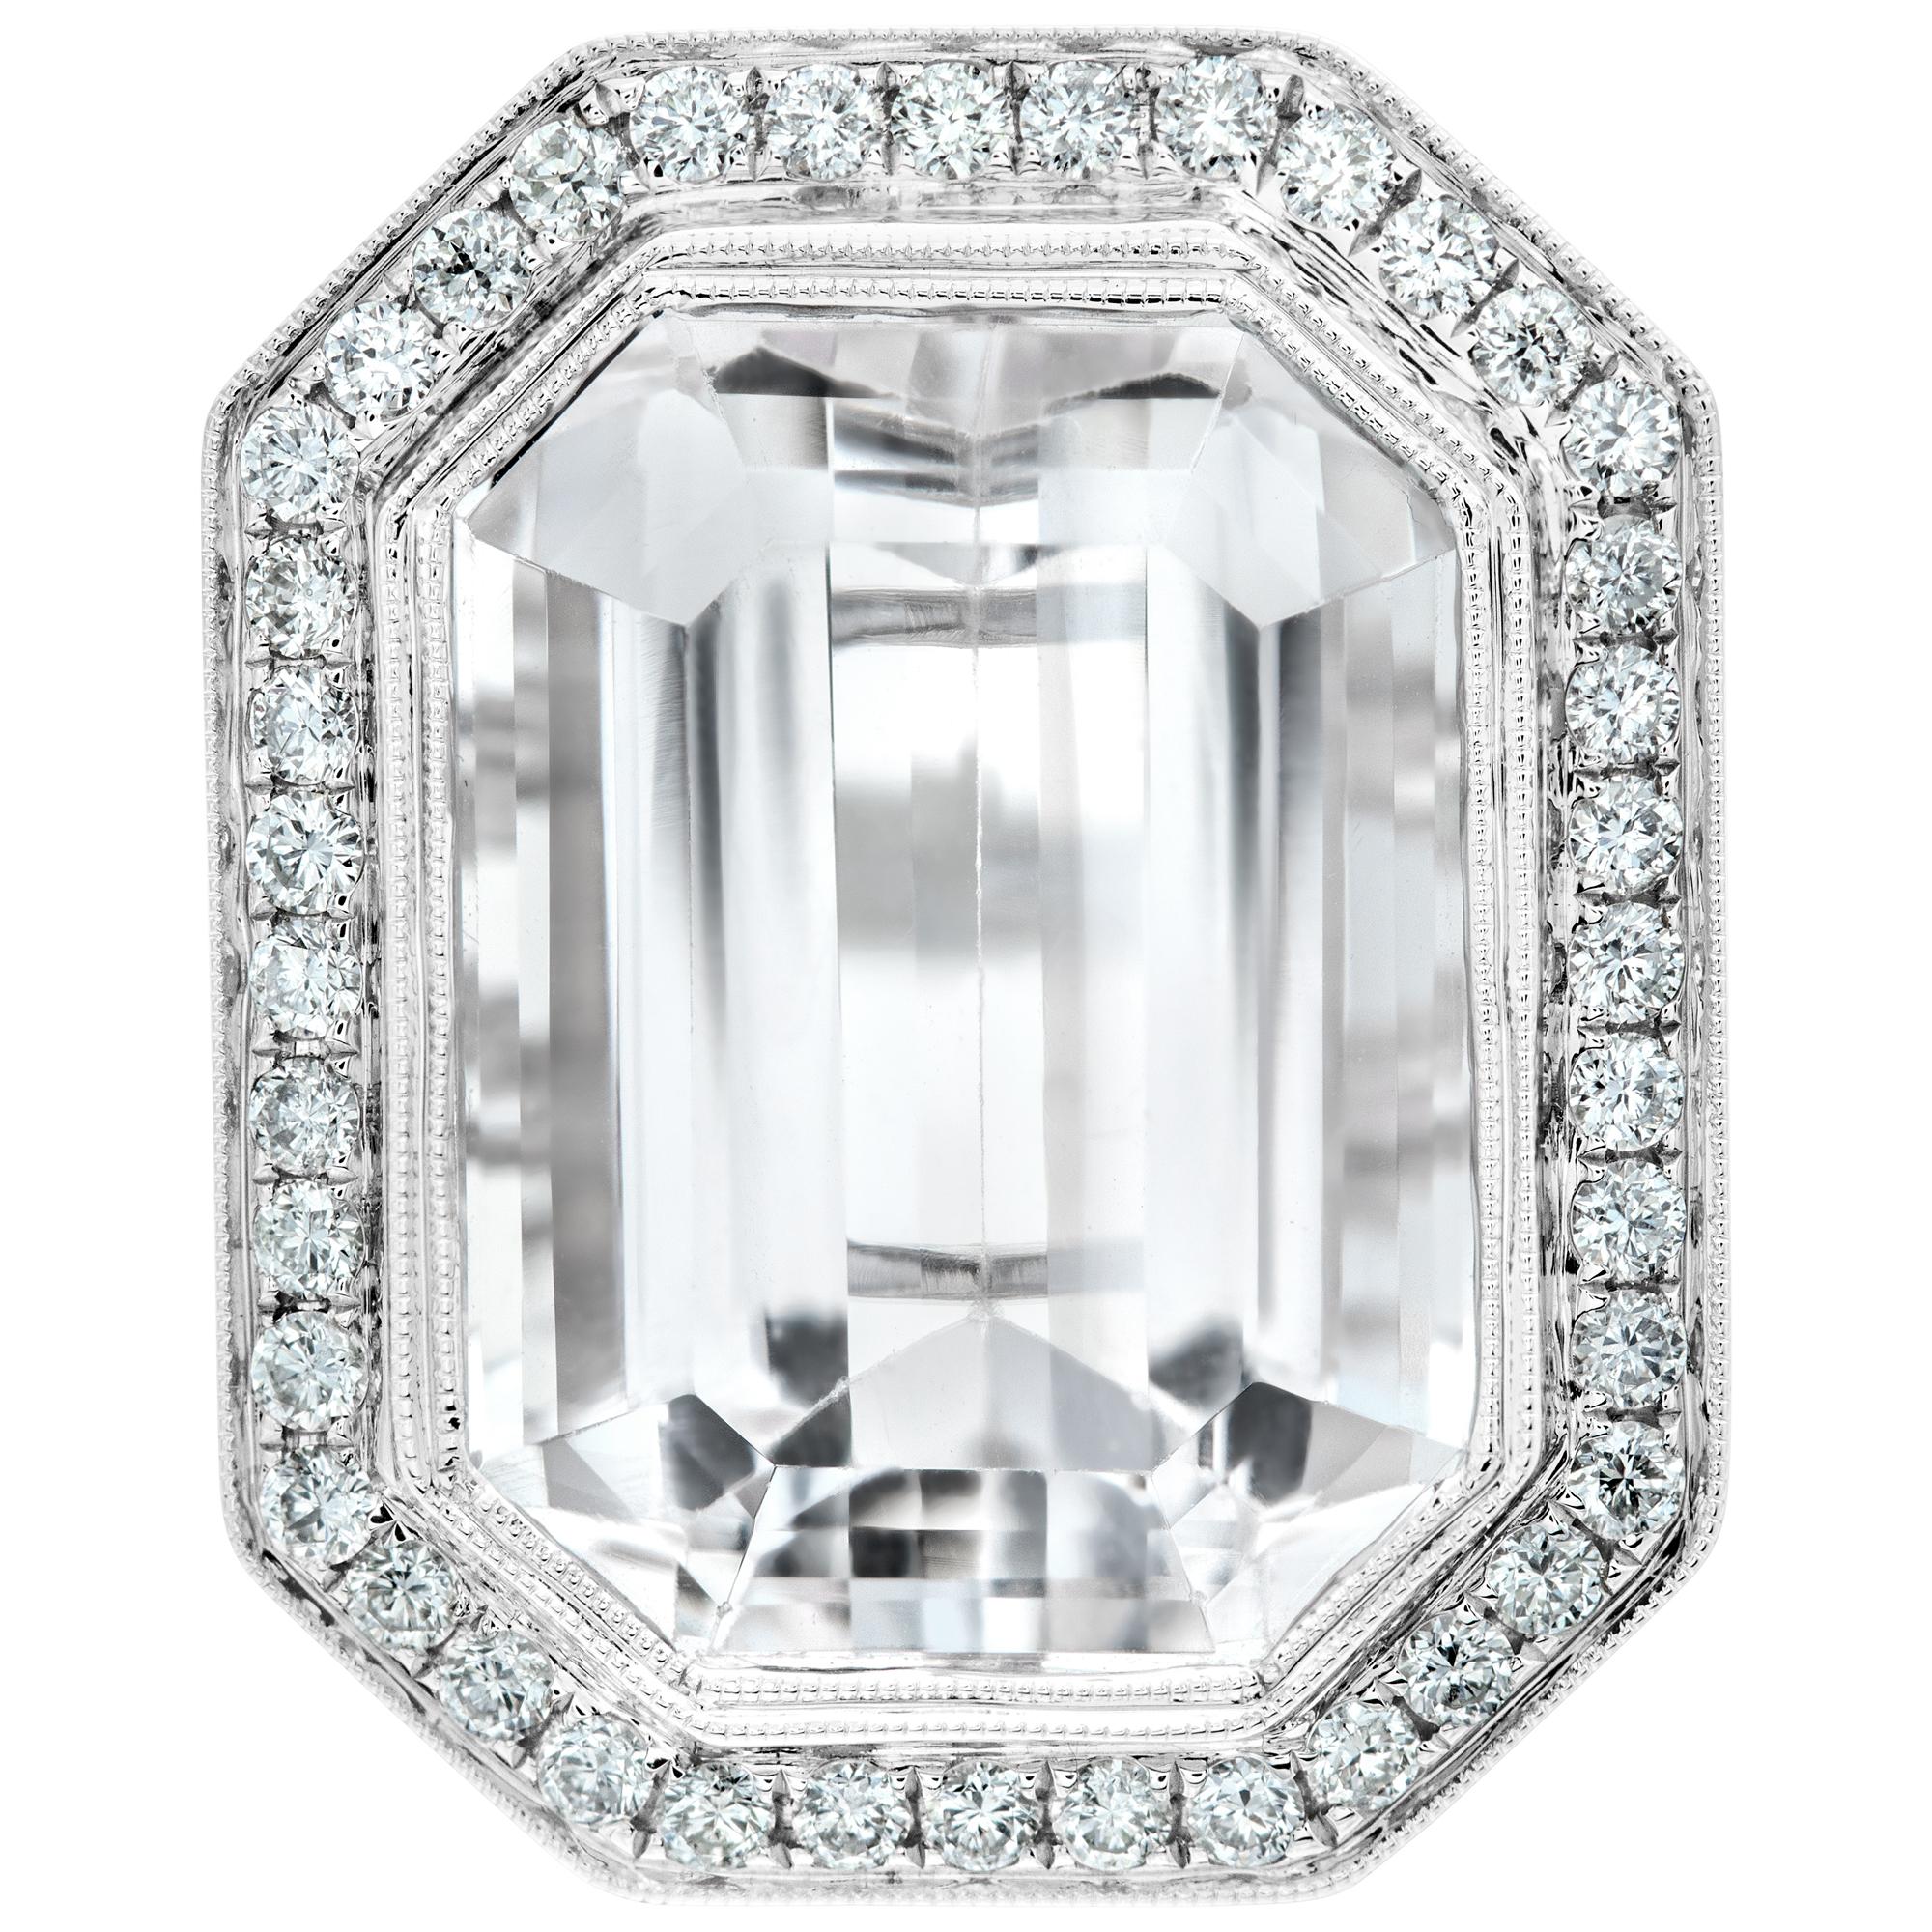 Cut cornered emerald brilliant cut 18.81 carats white Kunzite ring in 18k white gold. Round brilliant cut diamonds total approx. weight: 1.00 carat. Size 6.5, Center measurements: 24mm x 19mm.

This Kunzite ring is currently size 6.5 and some items